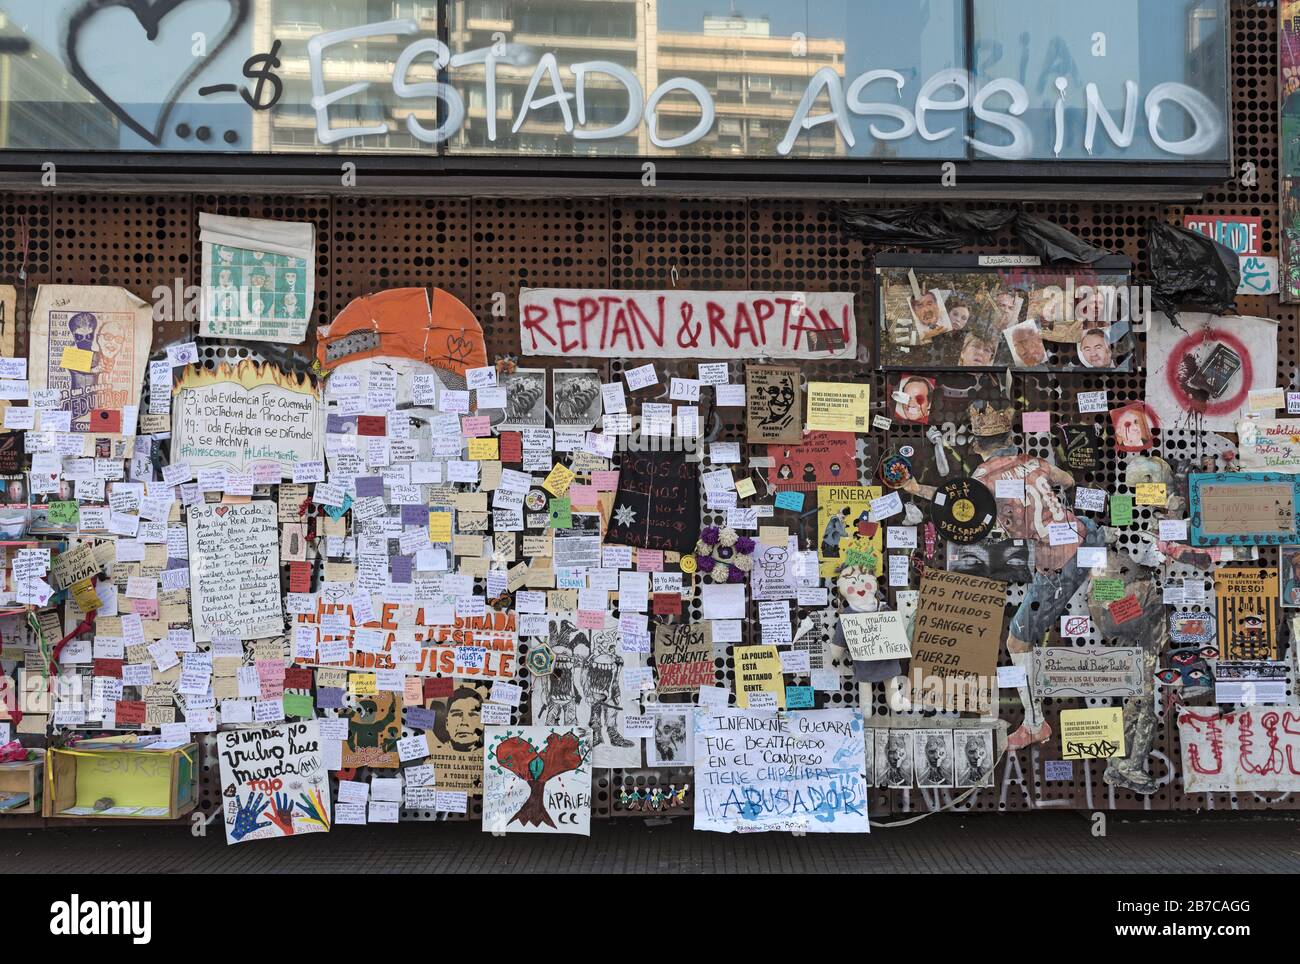 Political posters and notes of protests in Chile on a wall in Santiago, Chile Stock Photo